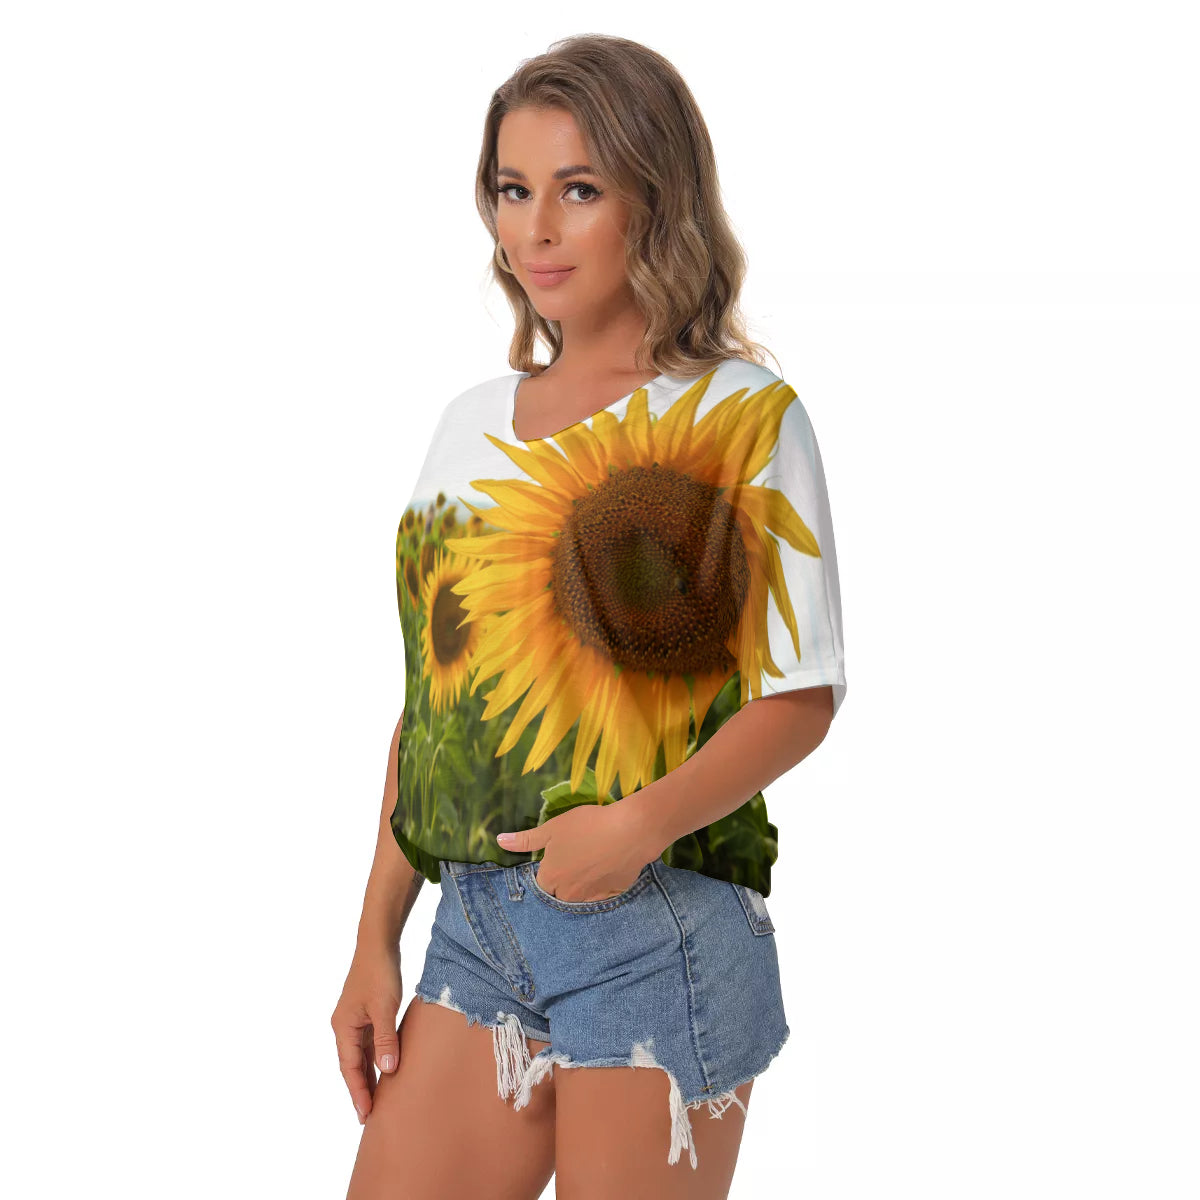 Sunflowers Women's Bat Sleeves V-Neck Top up to 2 XL